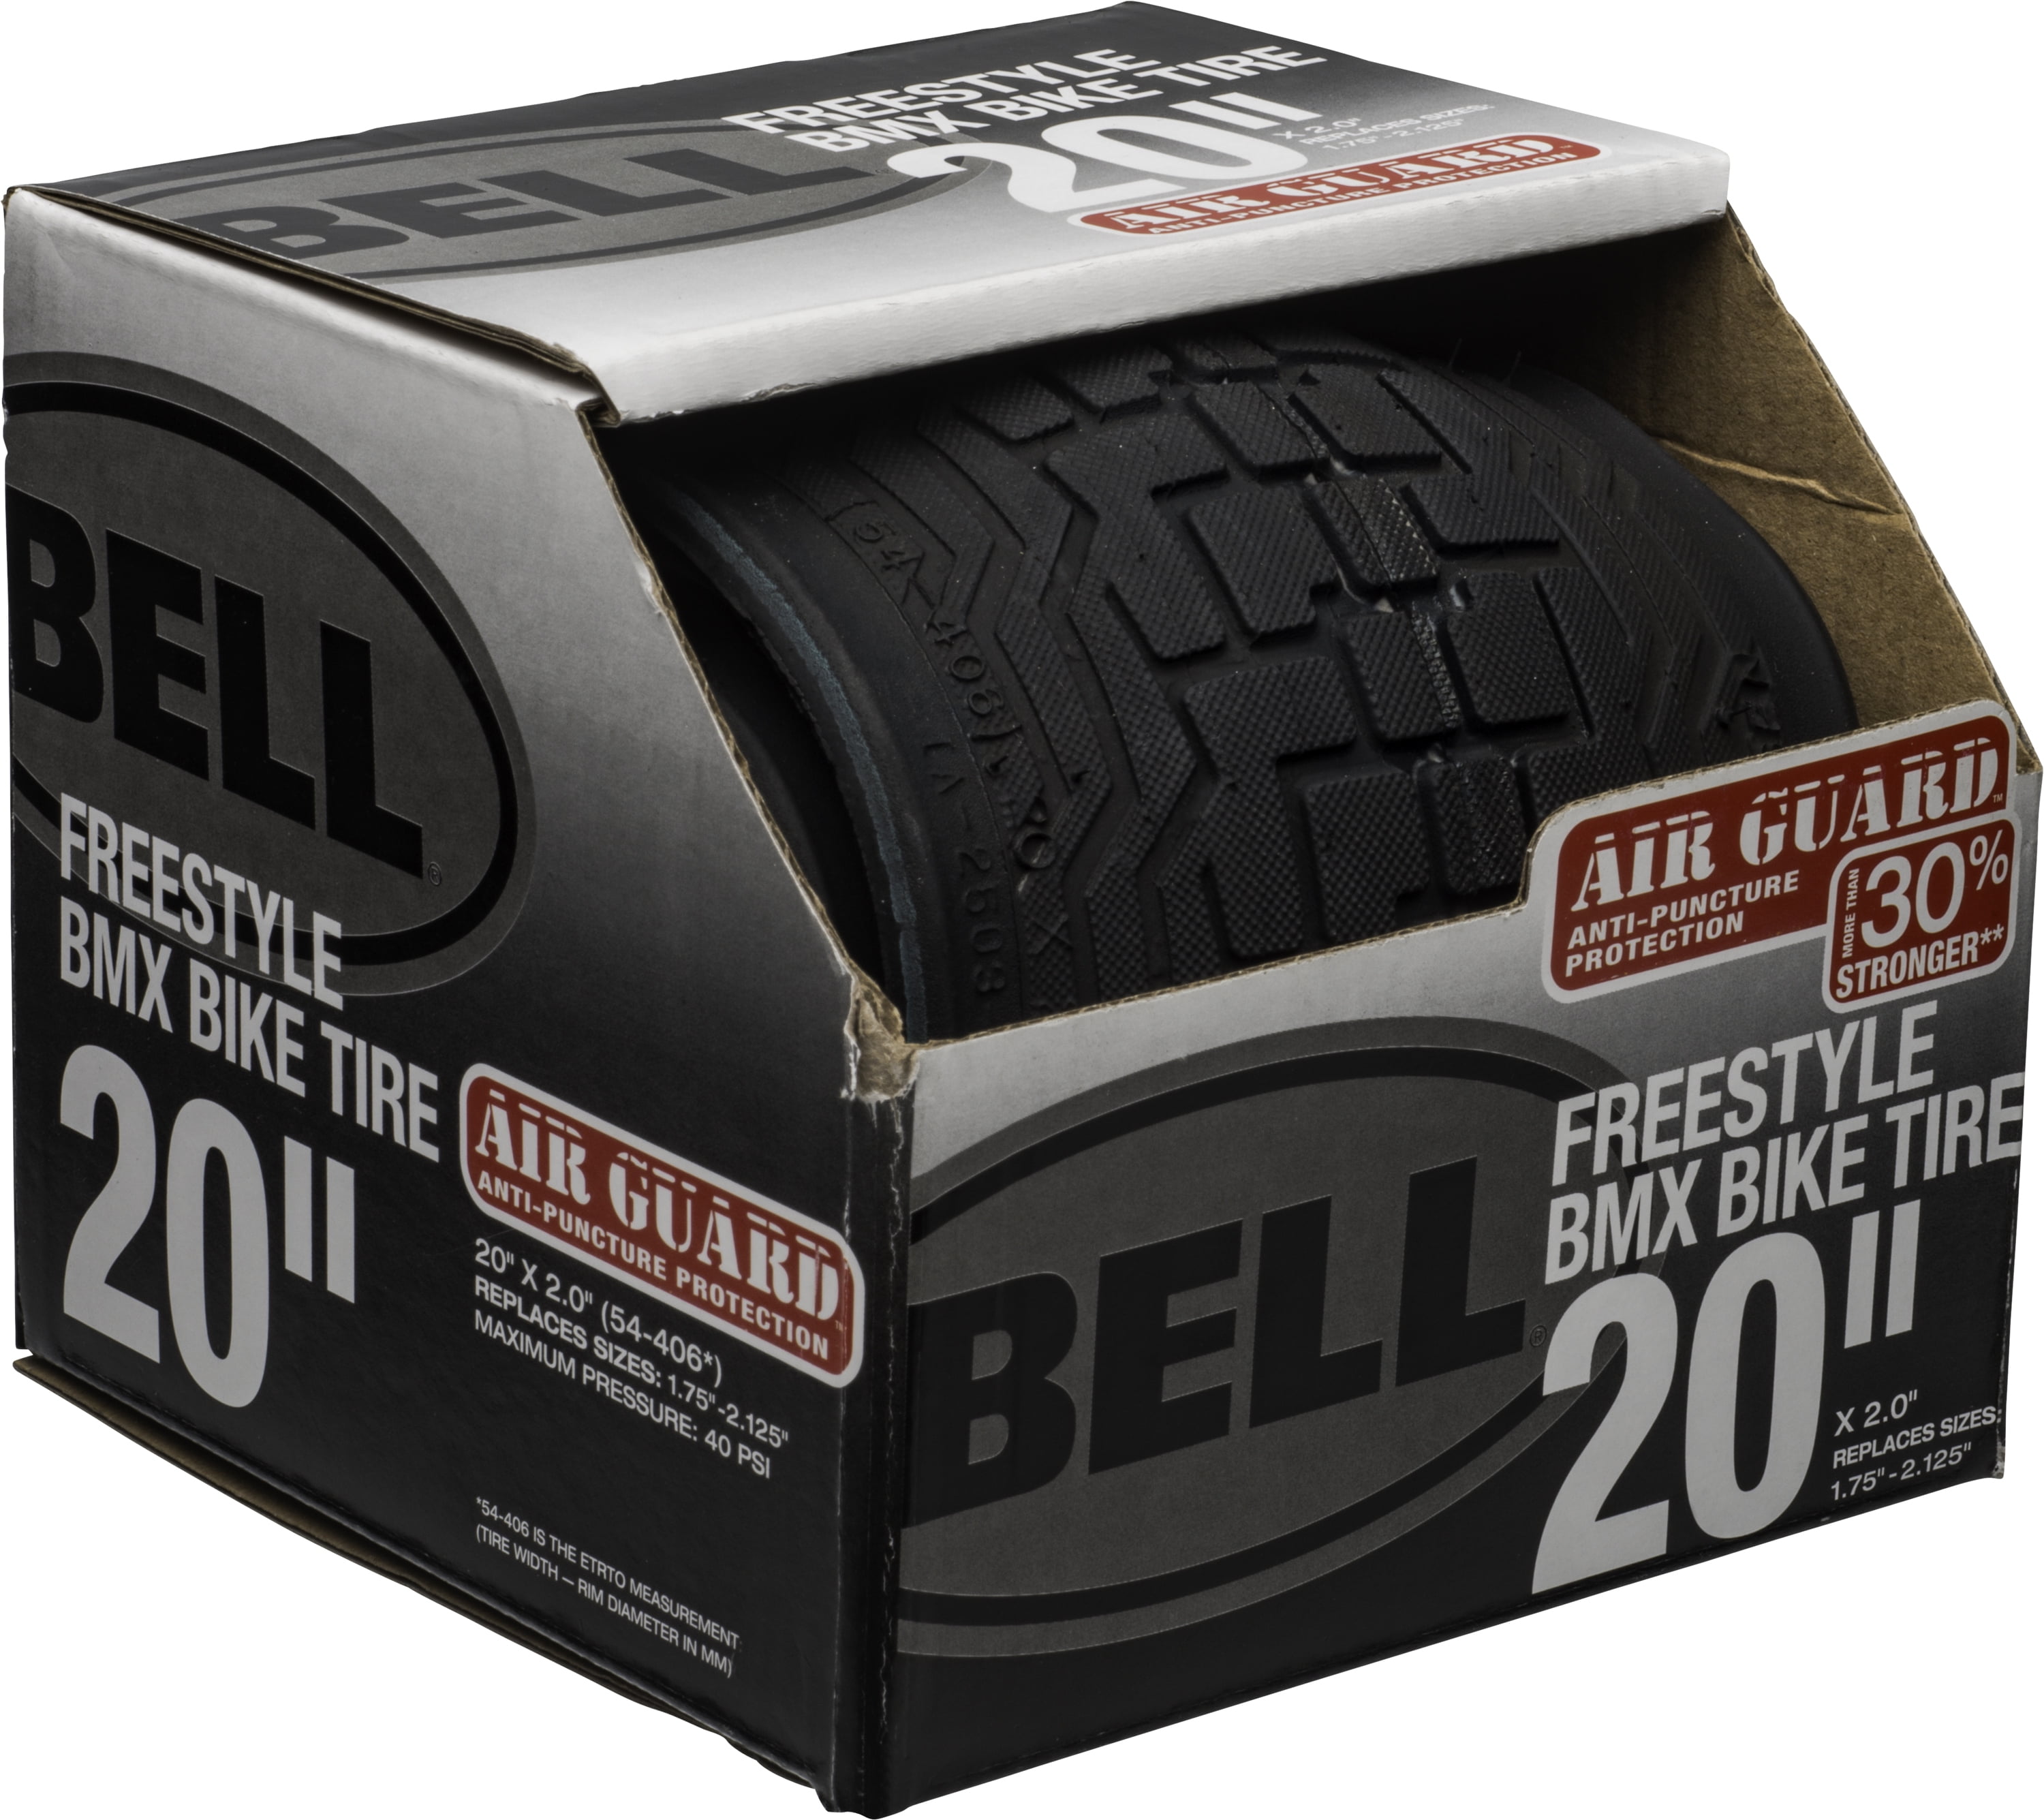 Bell BMX Bike Tire 20" x 2.125"  Replaces Sizes 1.75"-2.125" 